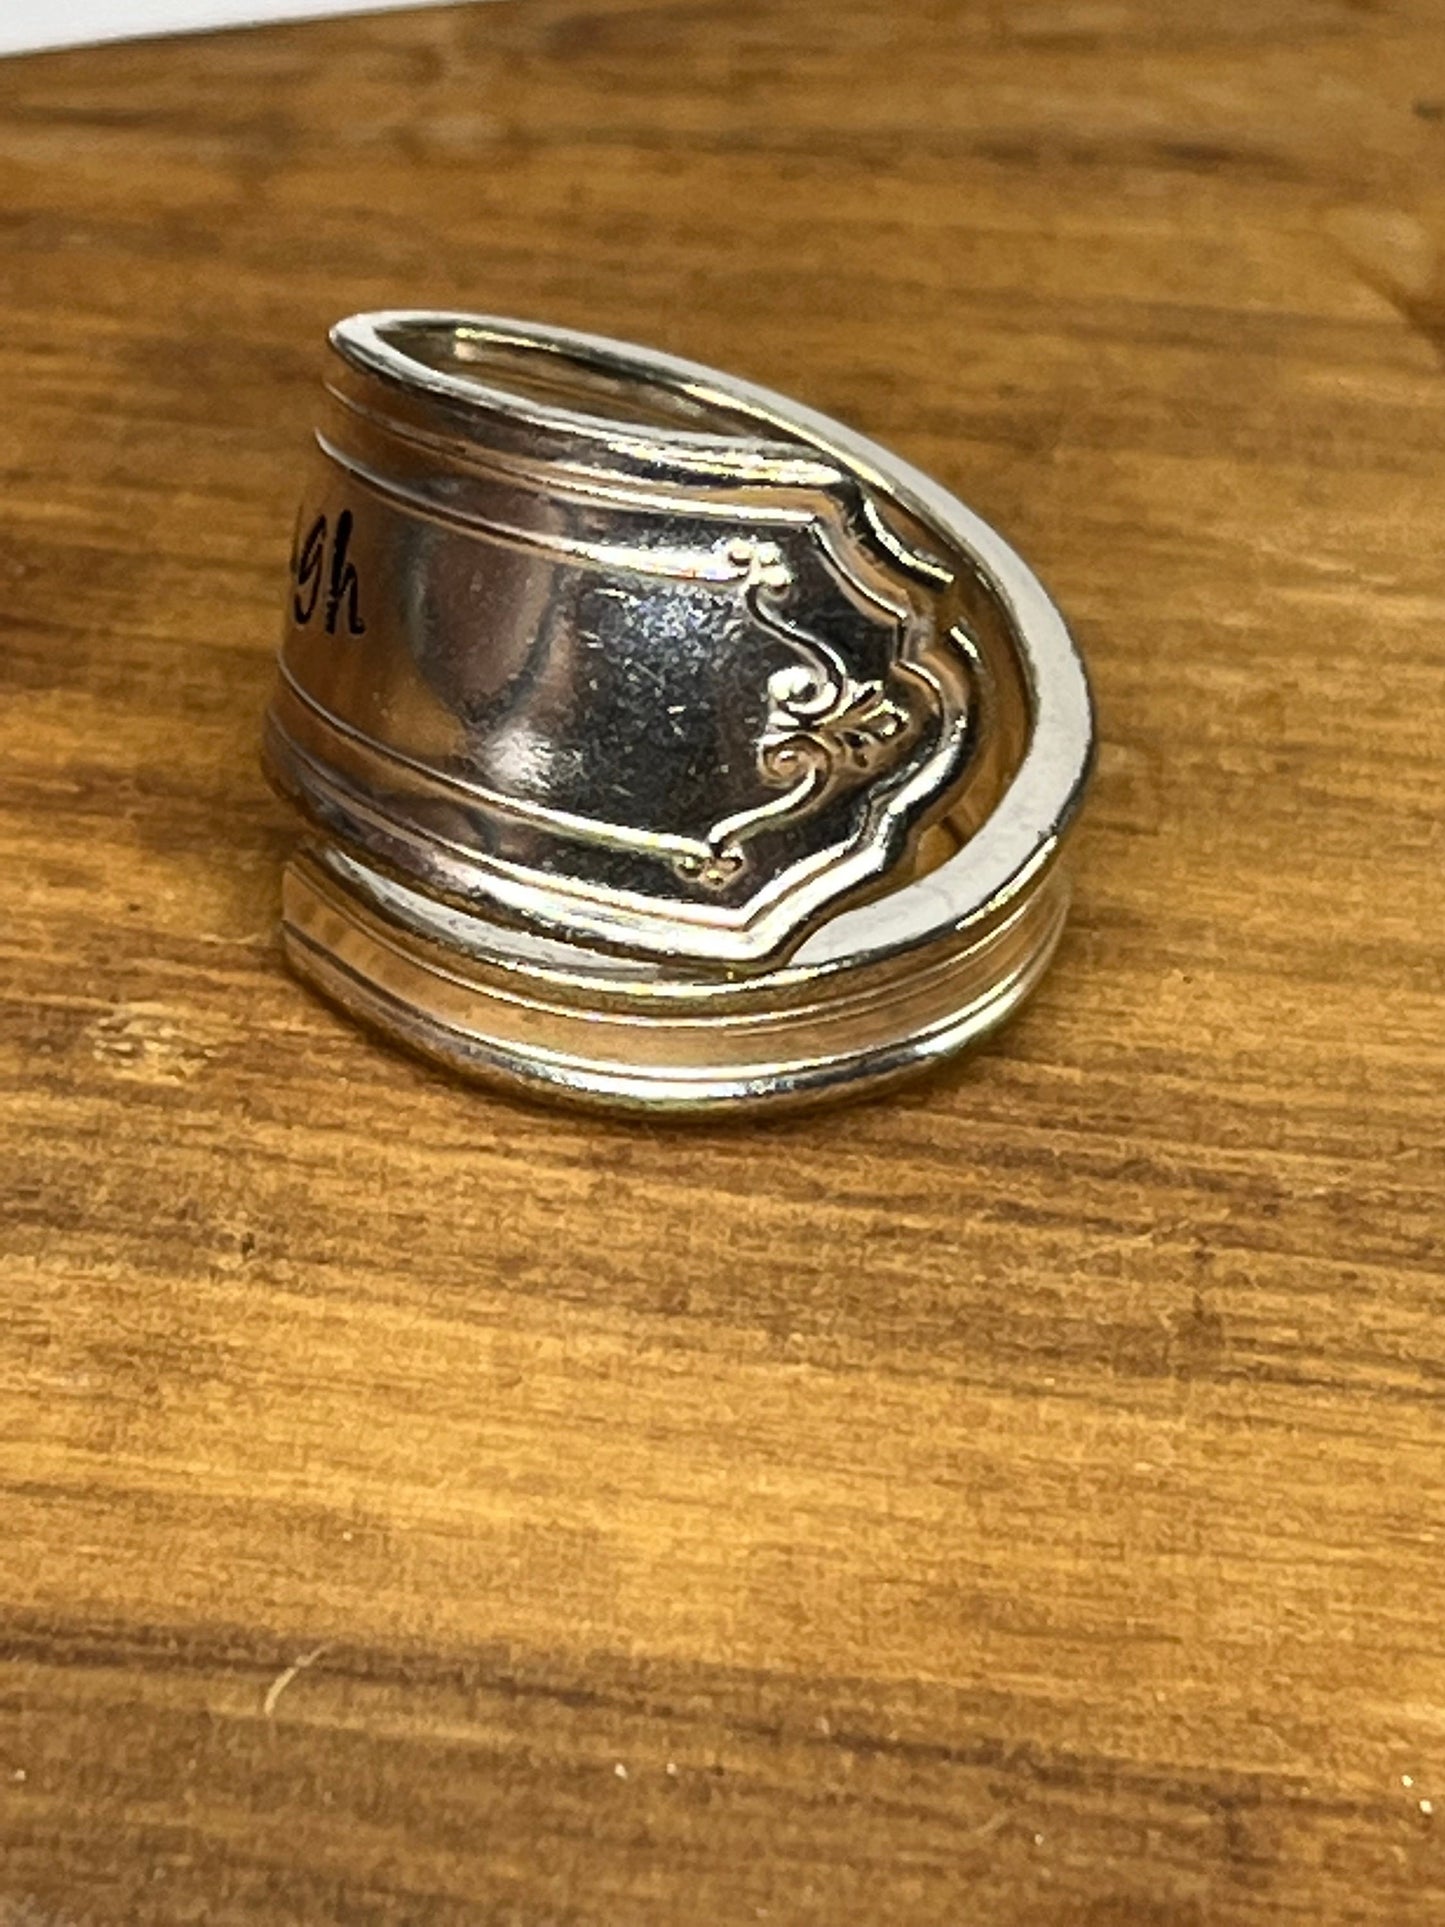 Silver Wrap Ring made from Vintage Spoon Handle with “Enough” hand stamped, Silverware Jewelry, Silver Spoon Ring for her,